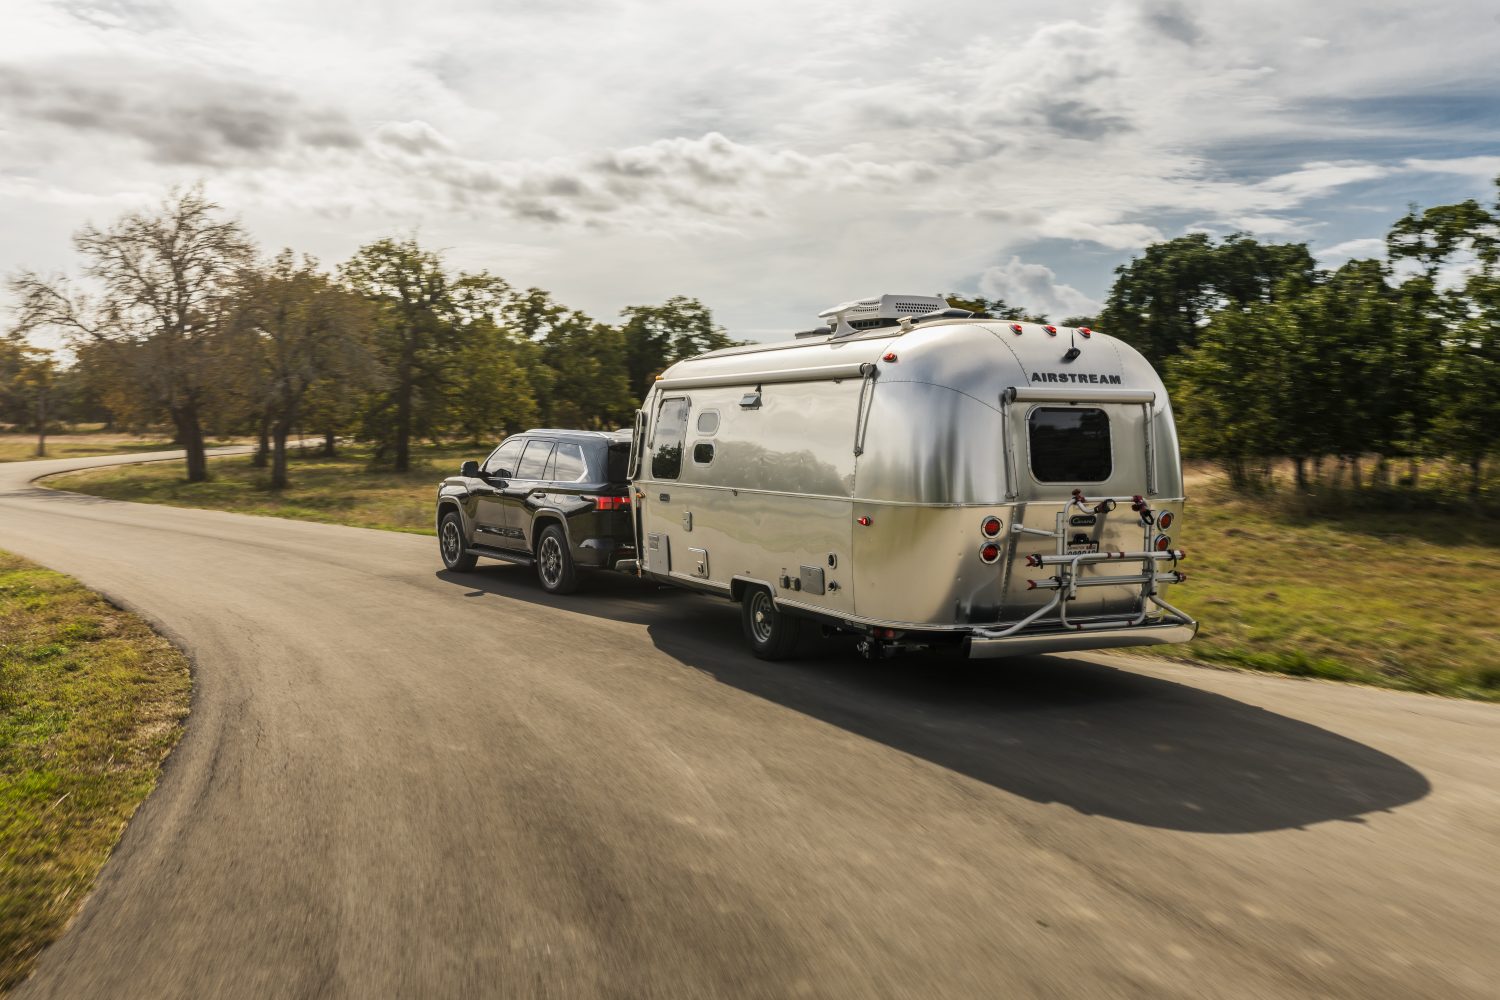 2023 Toyota Sequoia SUV towing an airstream camper trailer down a curvy, tree-lined road.